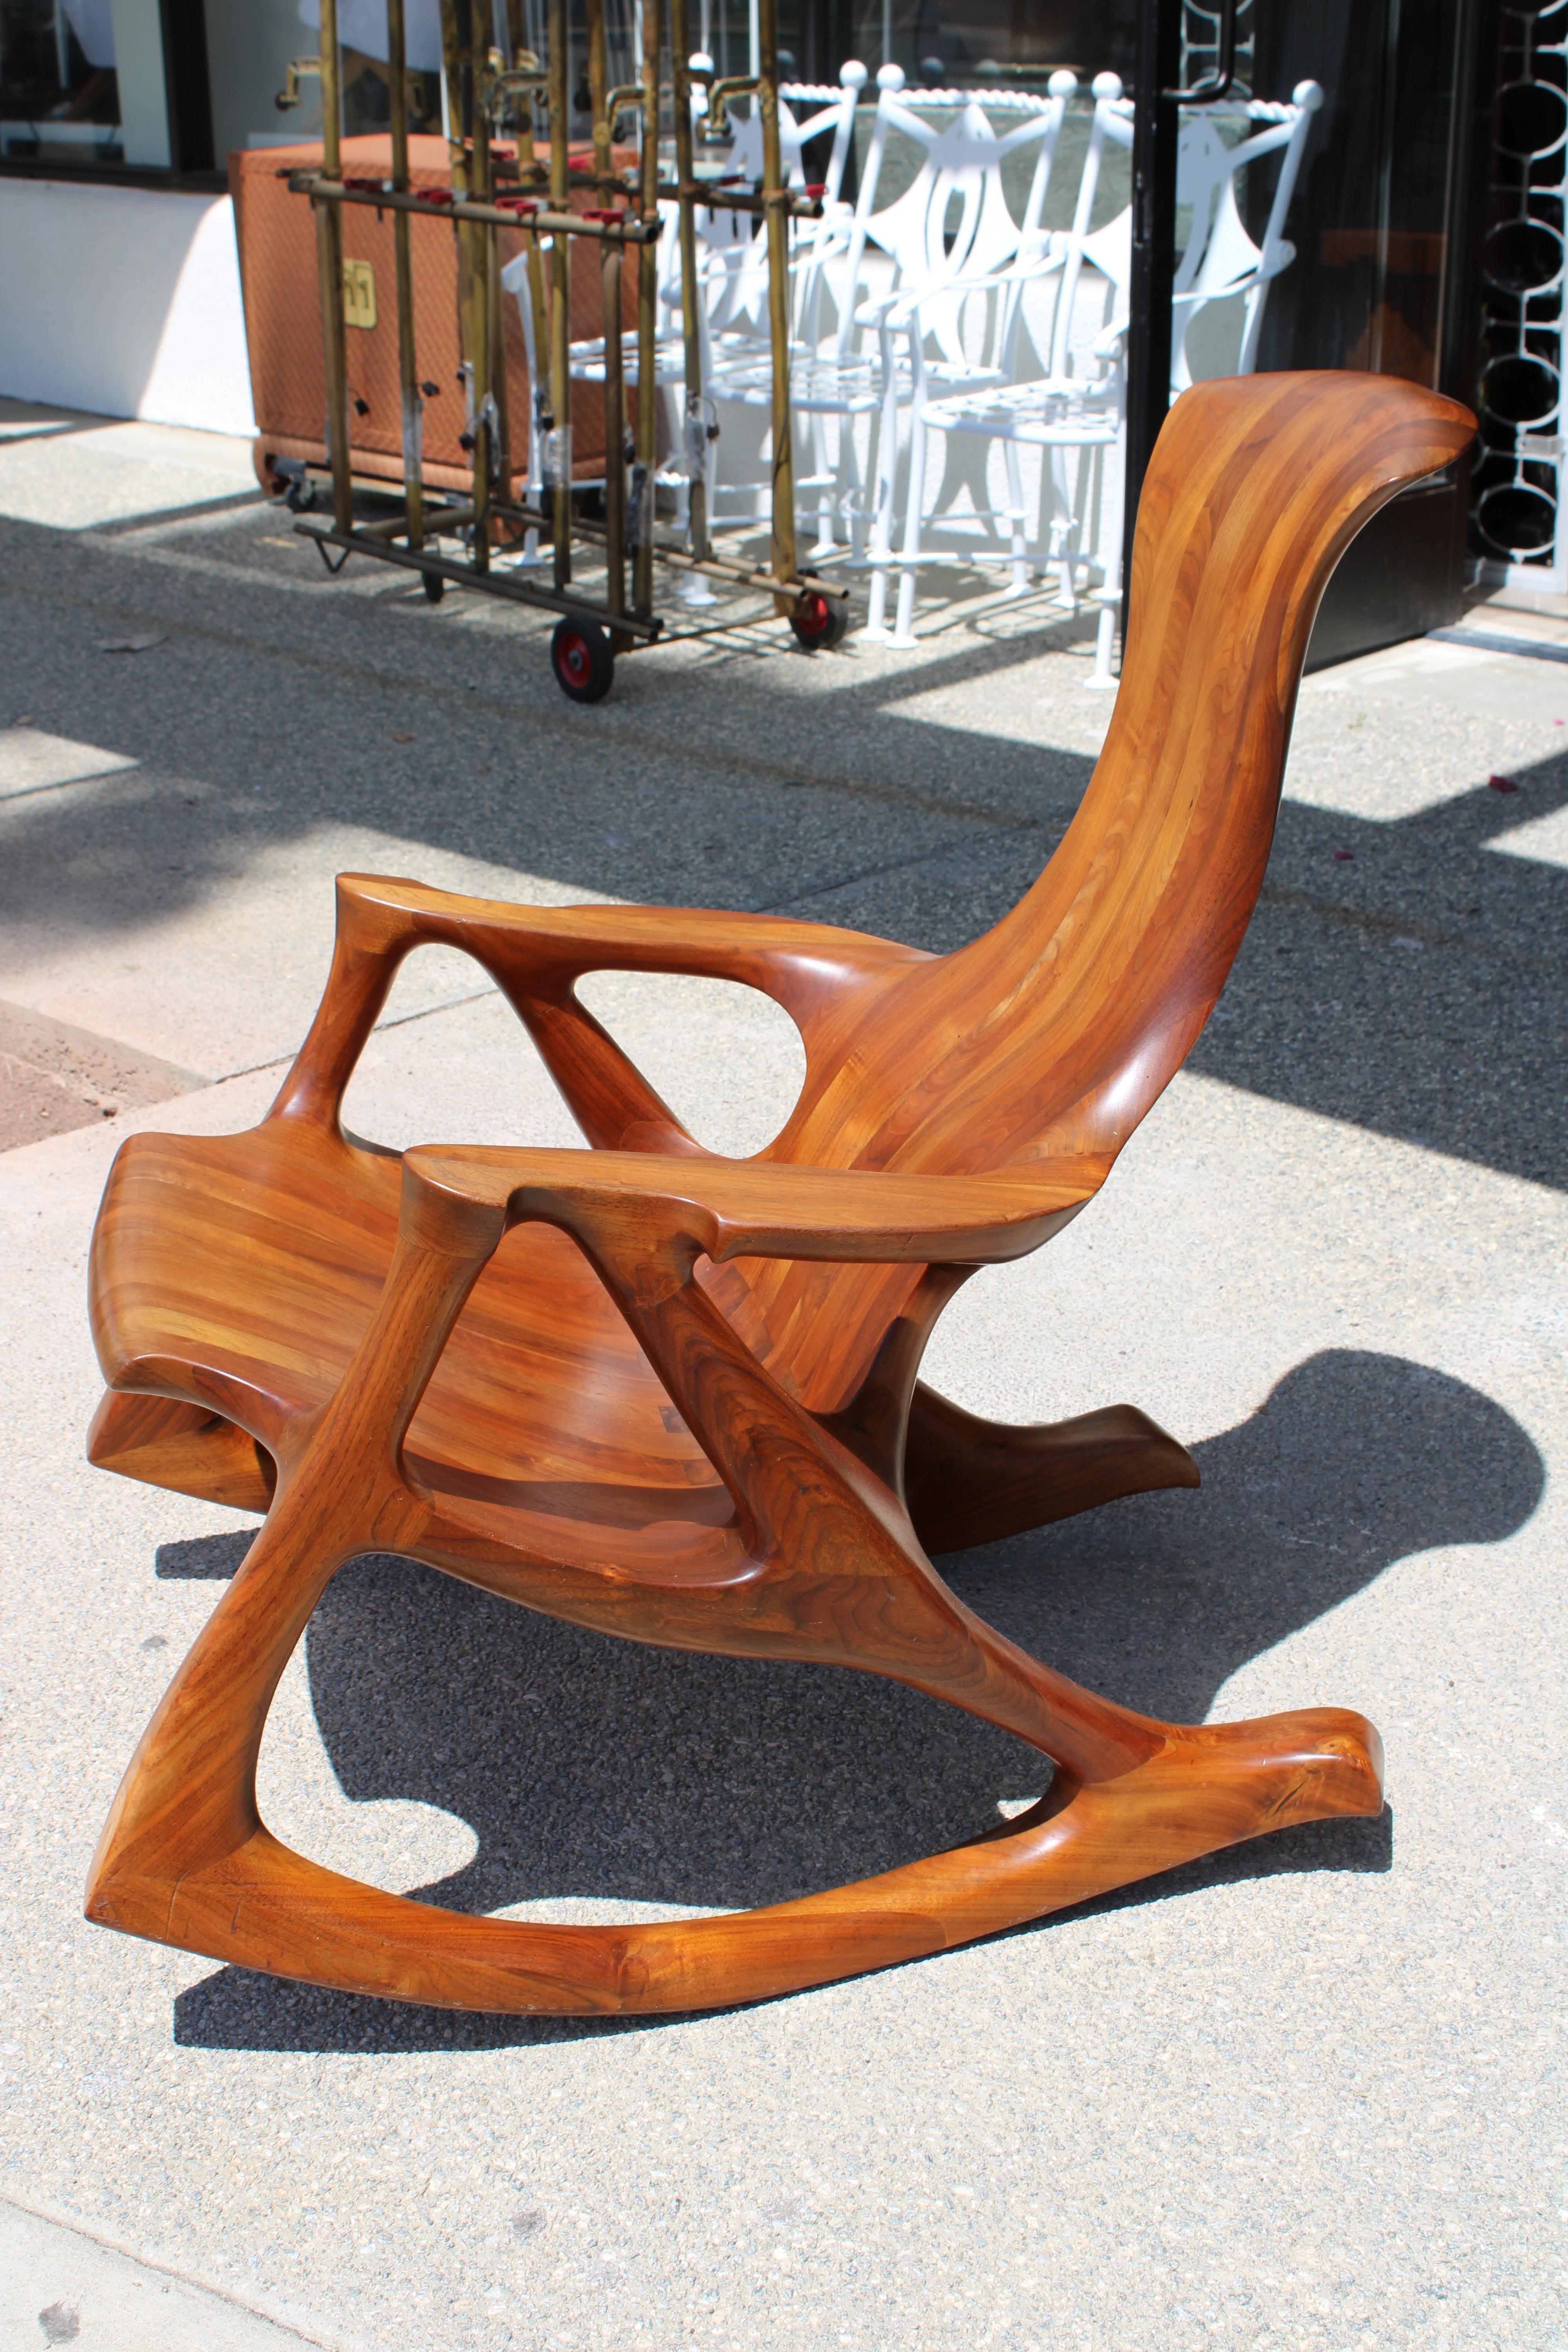 Sculptural Wood Rocker.  Rocker has been professionally refinished and measures 26.5